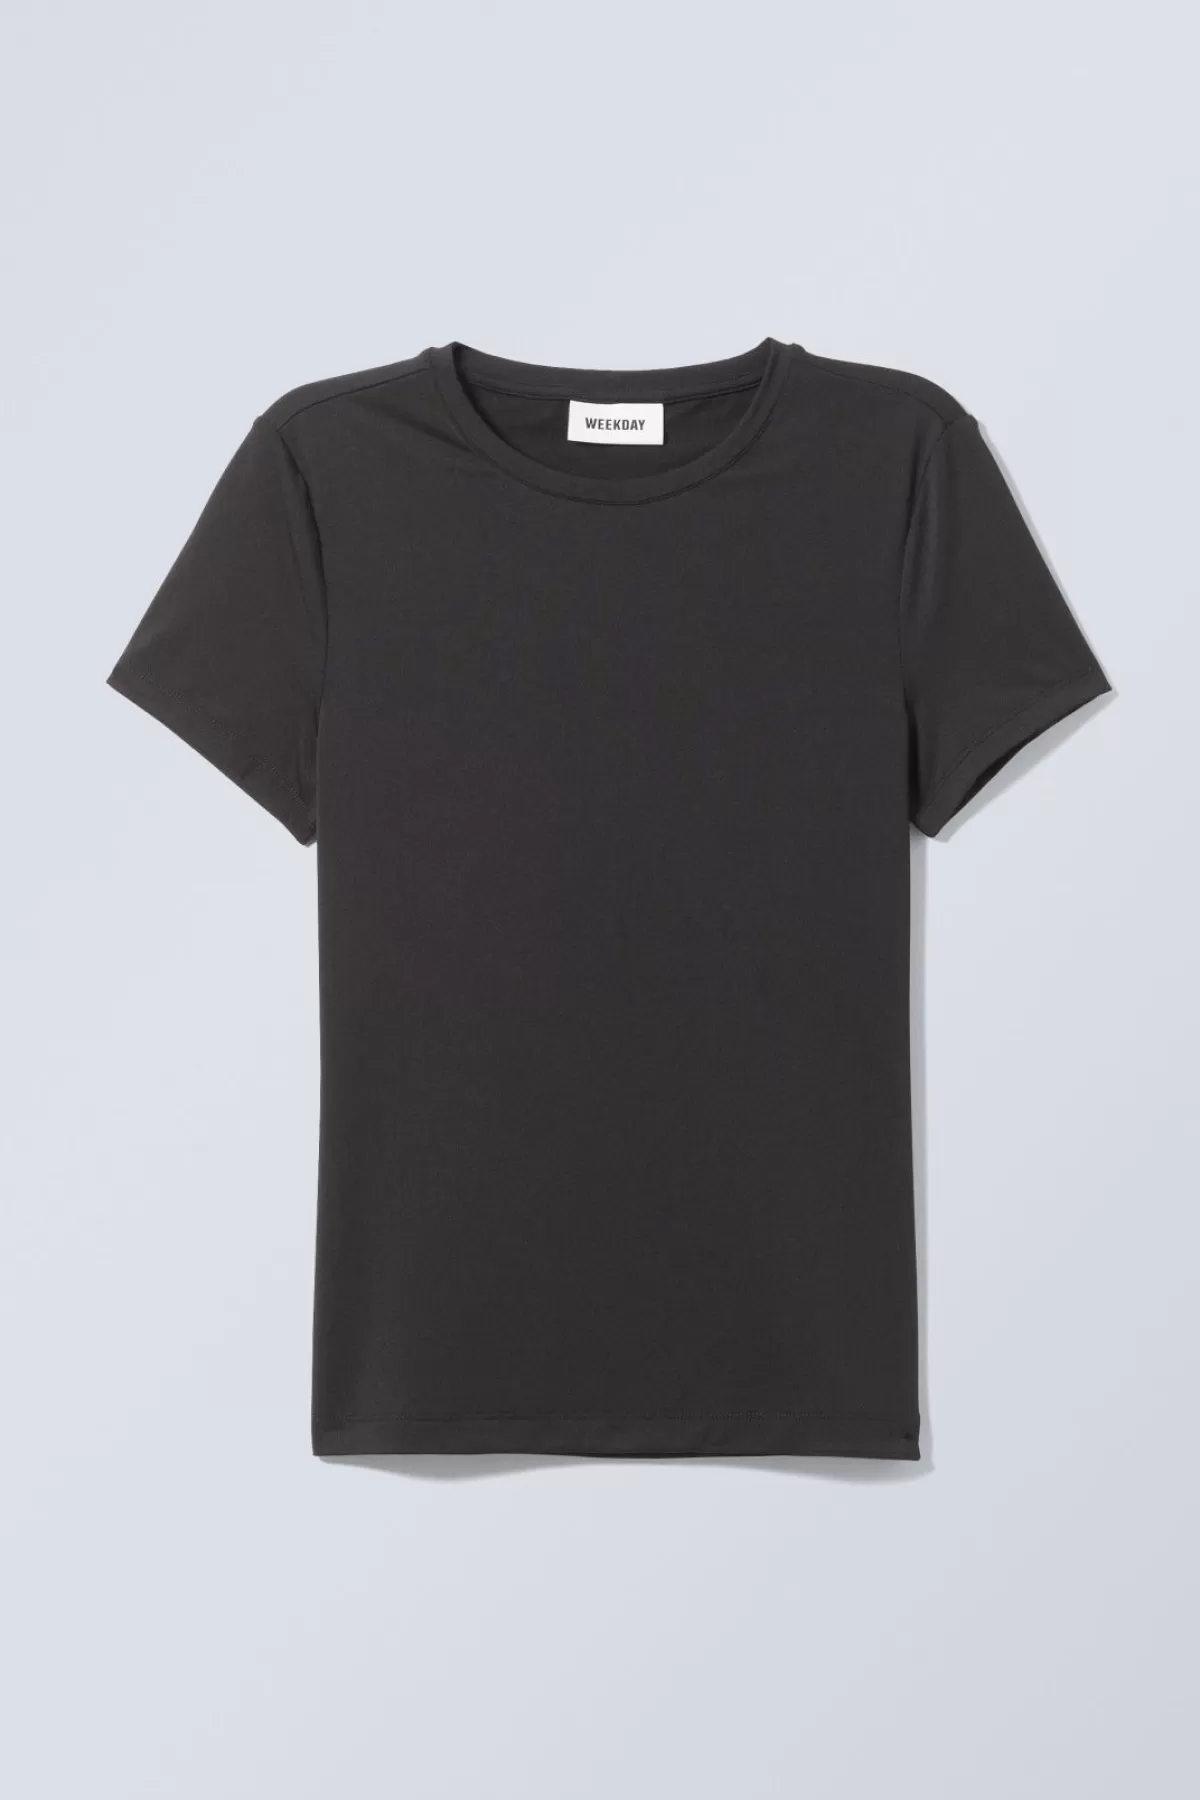 Weekday Fine T- shirt Clearance